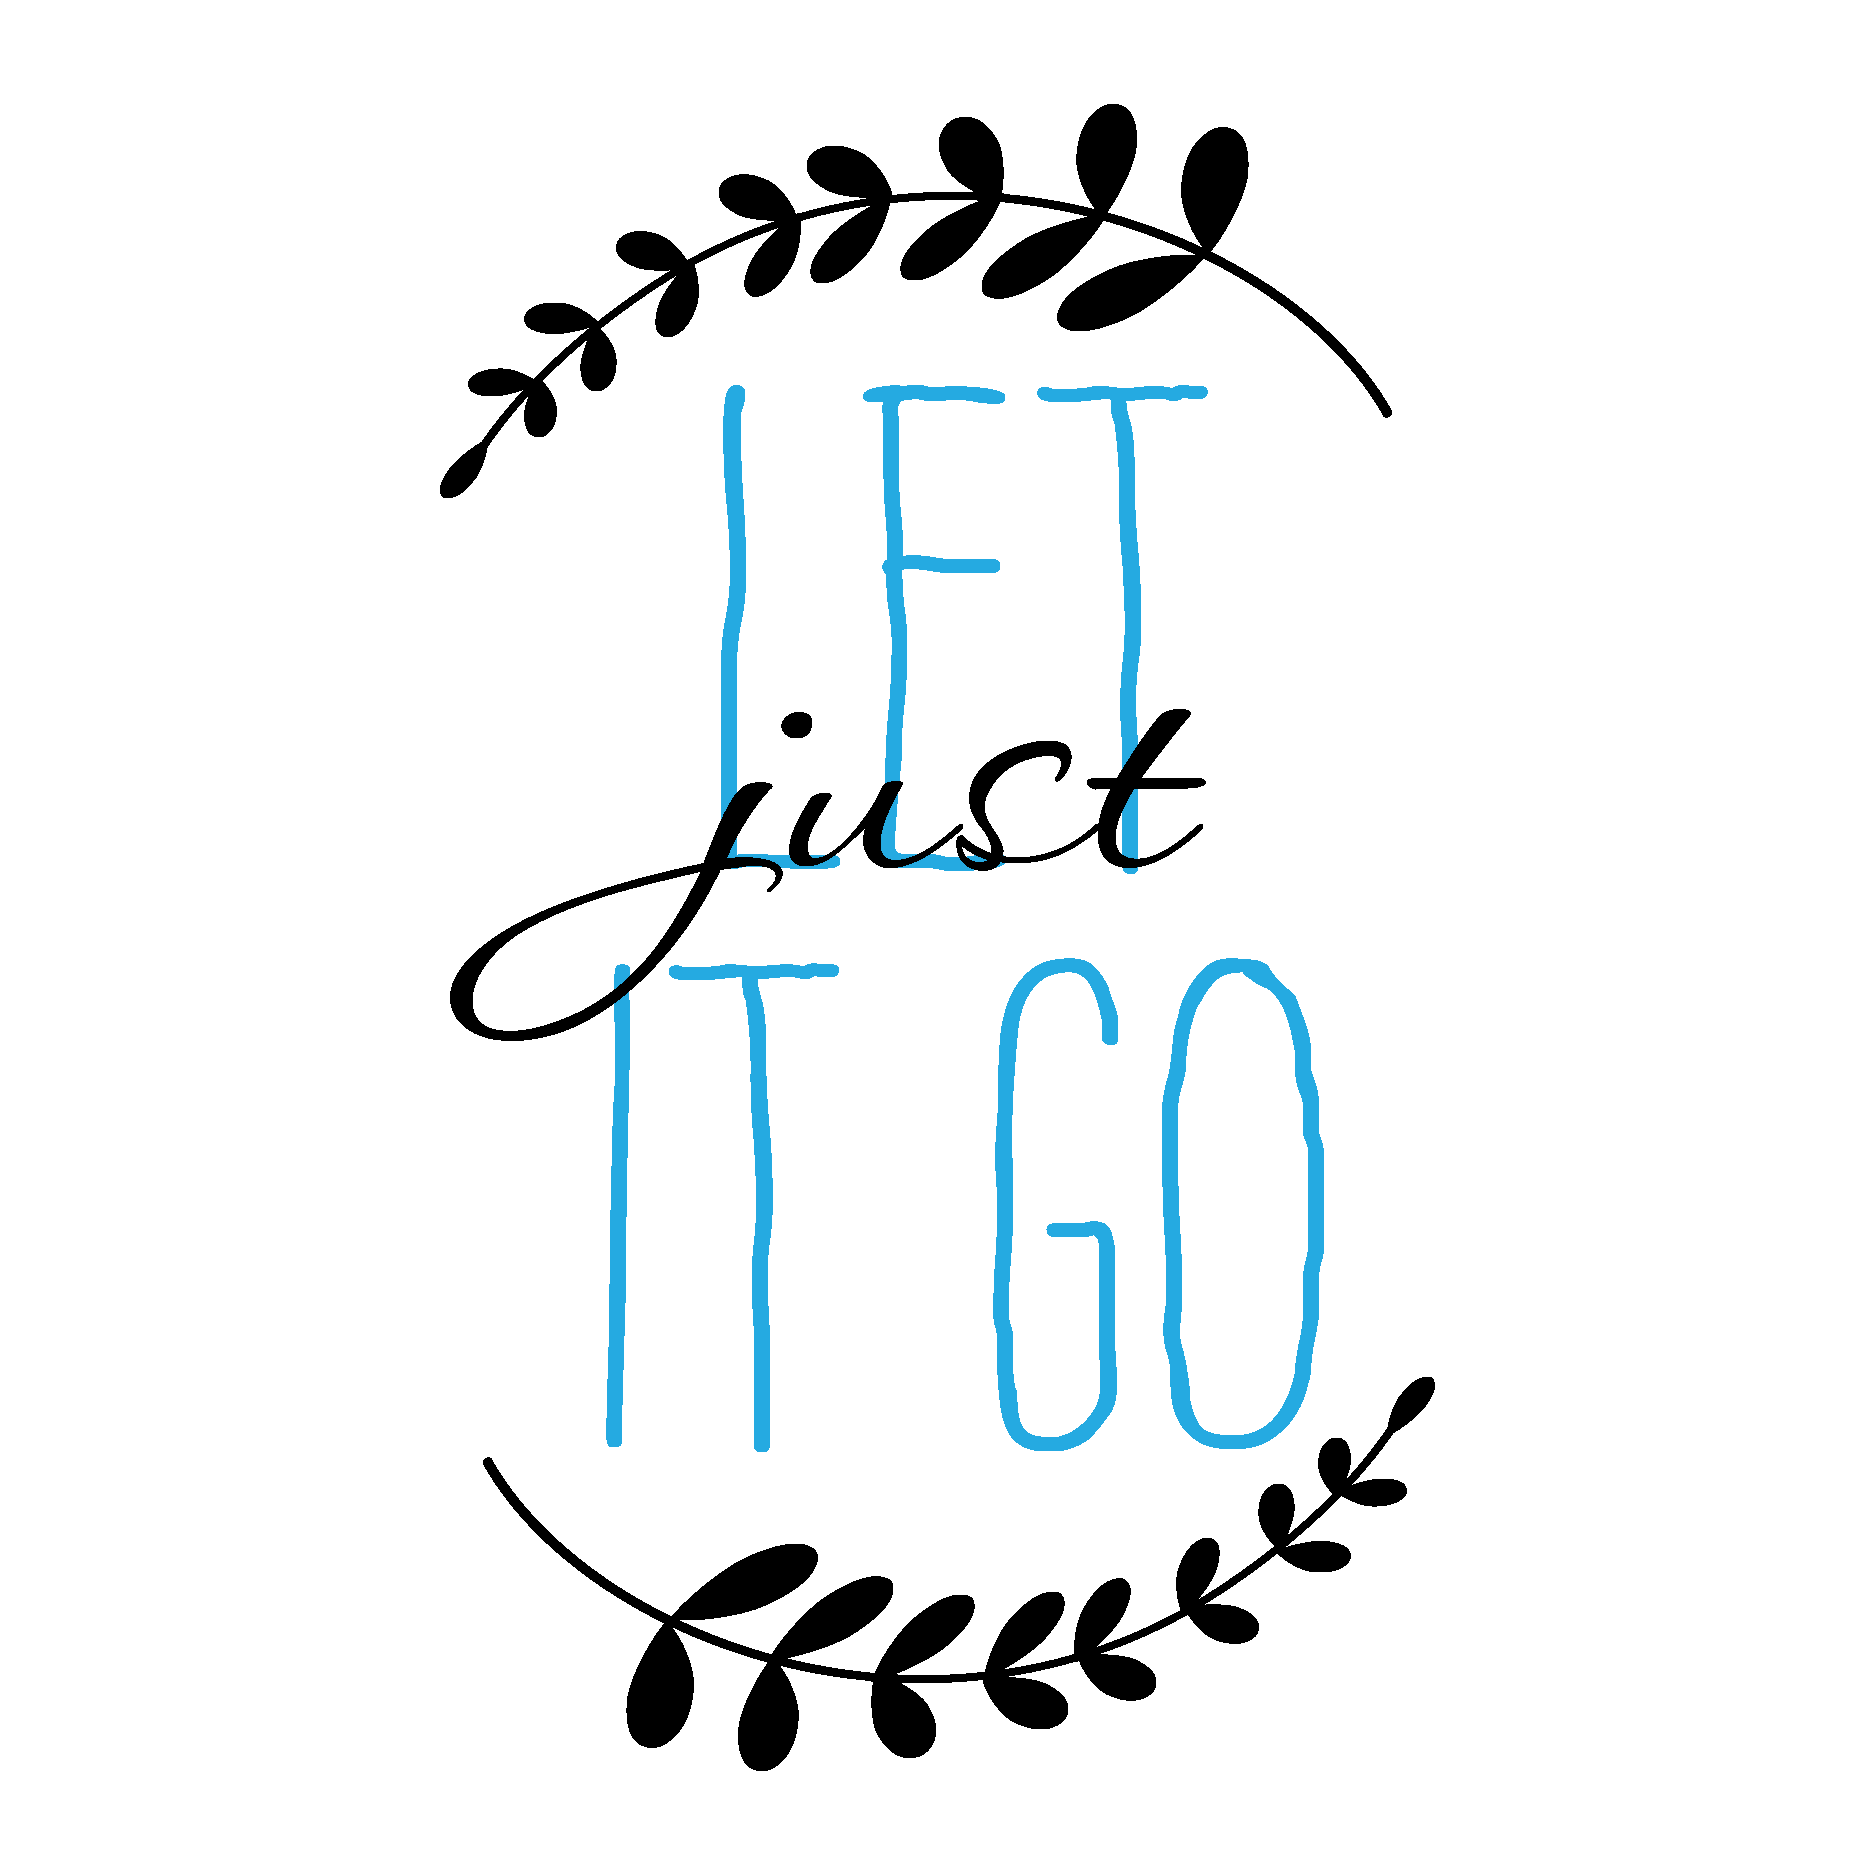 just let it go quotes